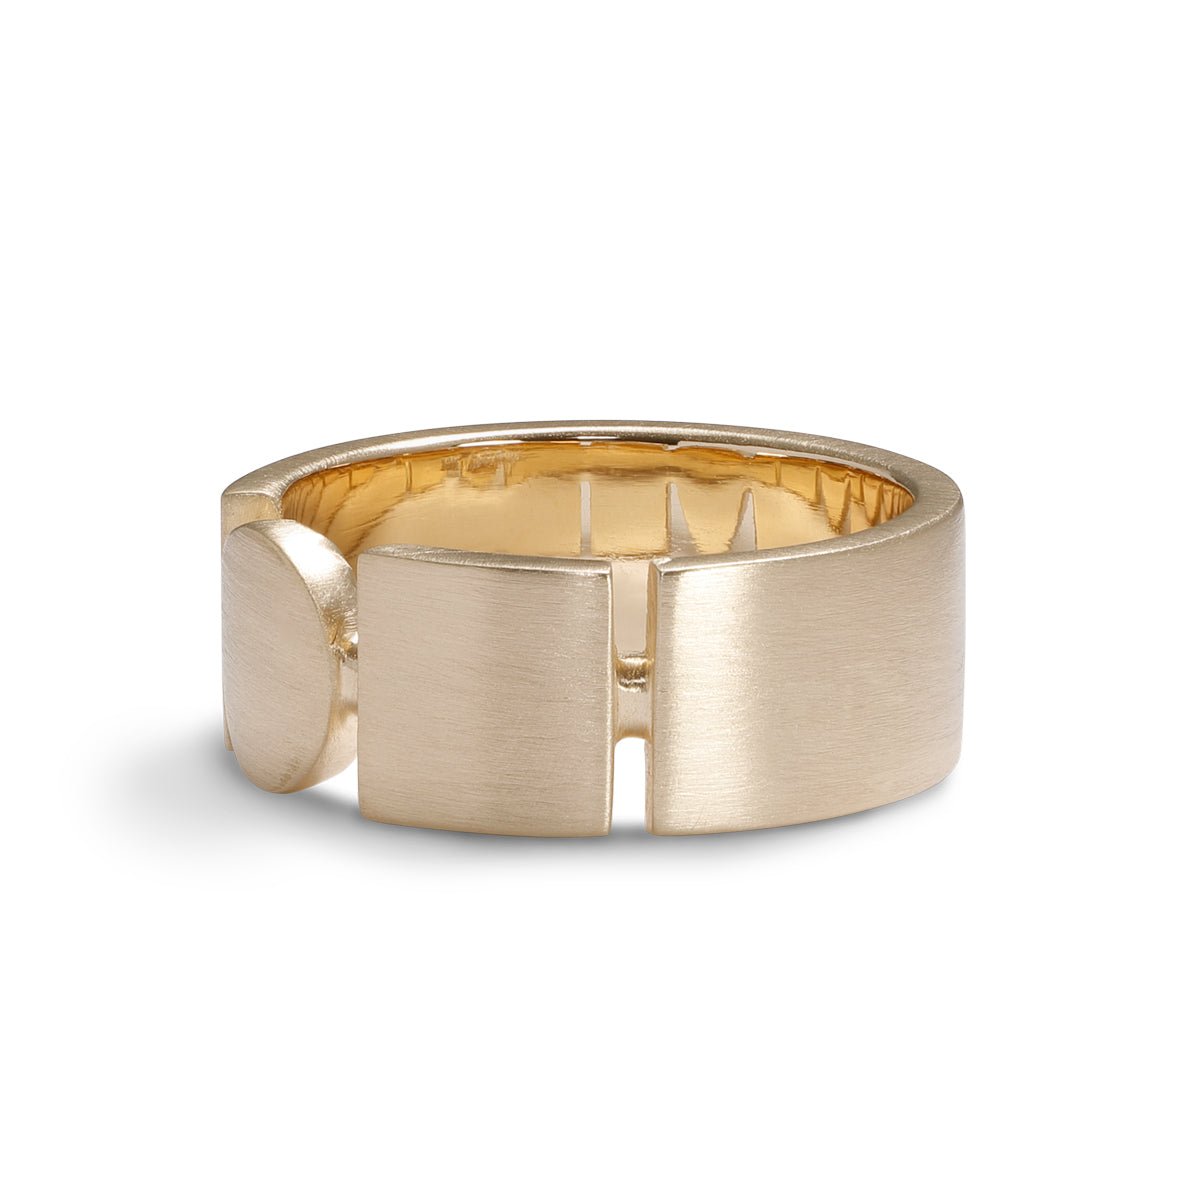 Square and circle motif Forma band. Made with 14K recycled gold in Portland, Oregon.